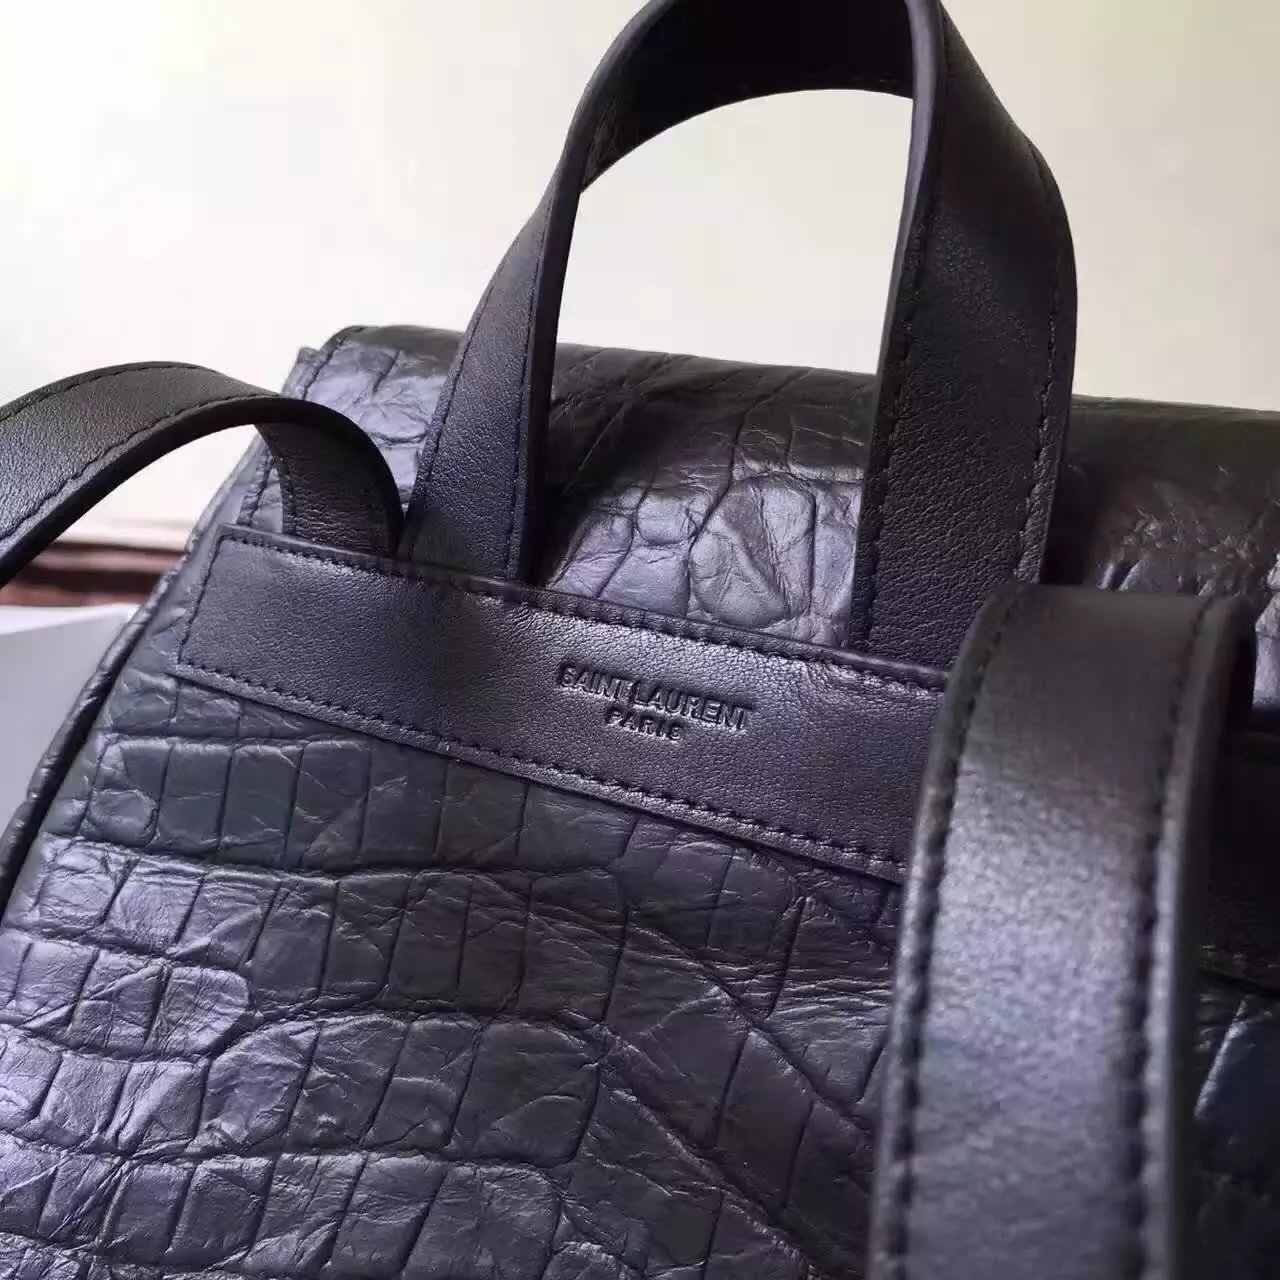 Limited Edition!2016 New Saint Laurent Bag Cheap Sale-Saint Laurent Festival Backpack in Black Crocodile Embossed Leather - Click Image to Close